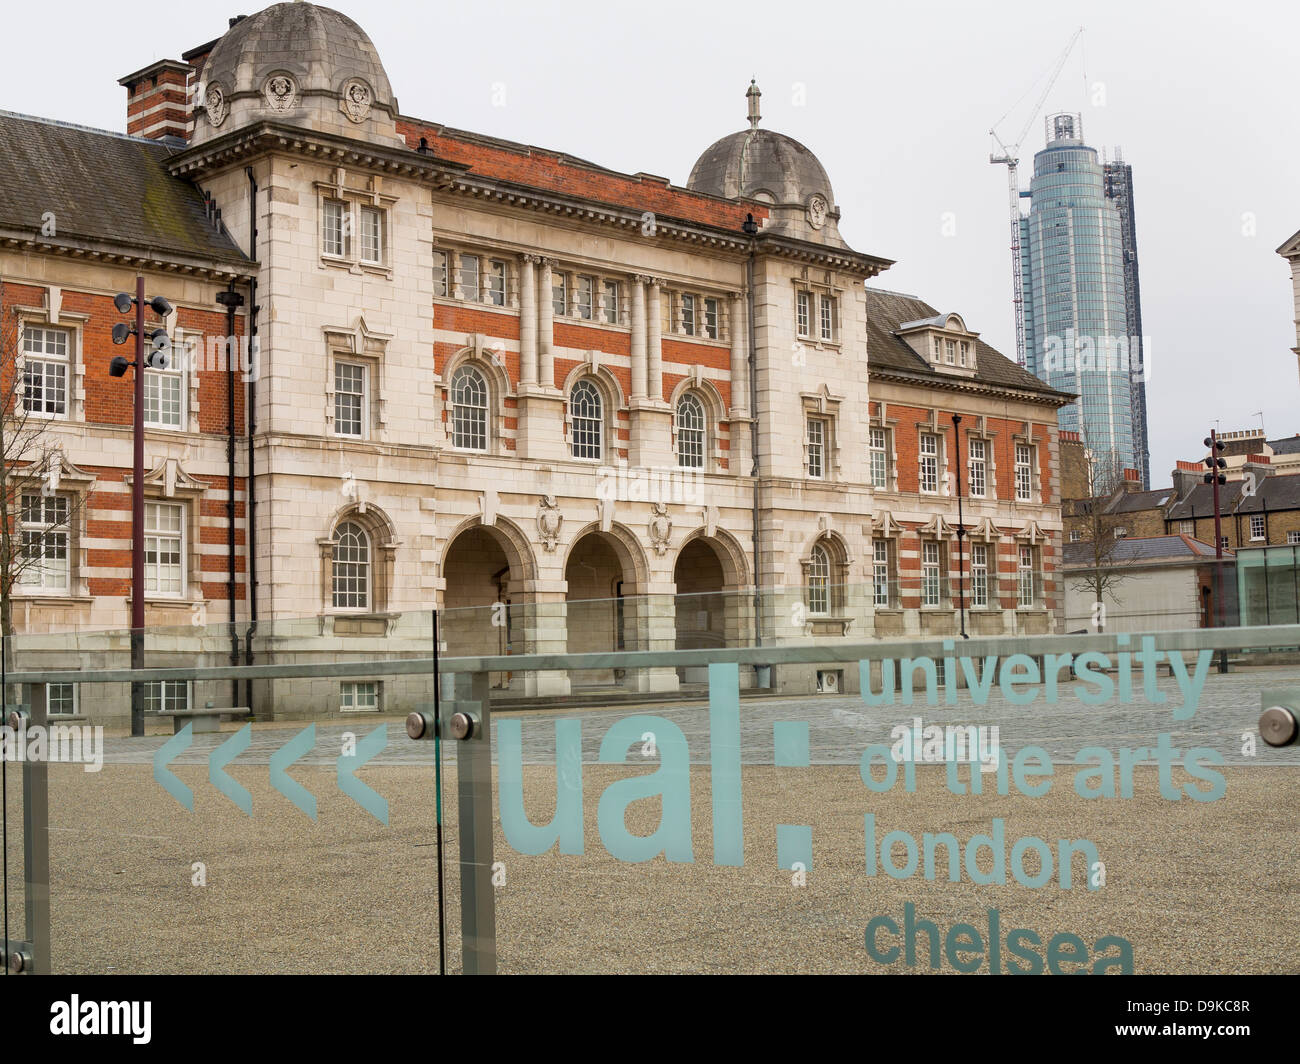 Rootstein Hopkins Parade Ground and the University of the Arts, London buildings of the Chelsea campus. Stock Photo